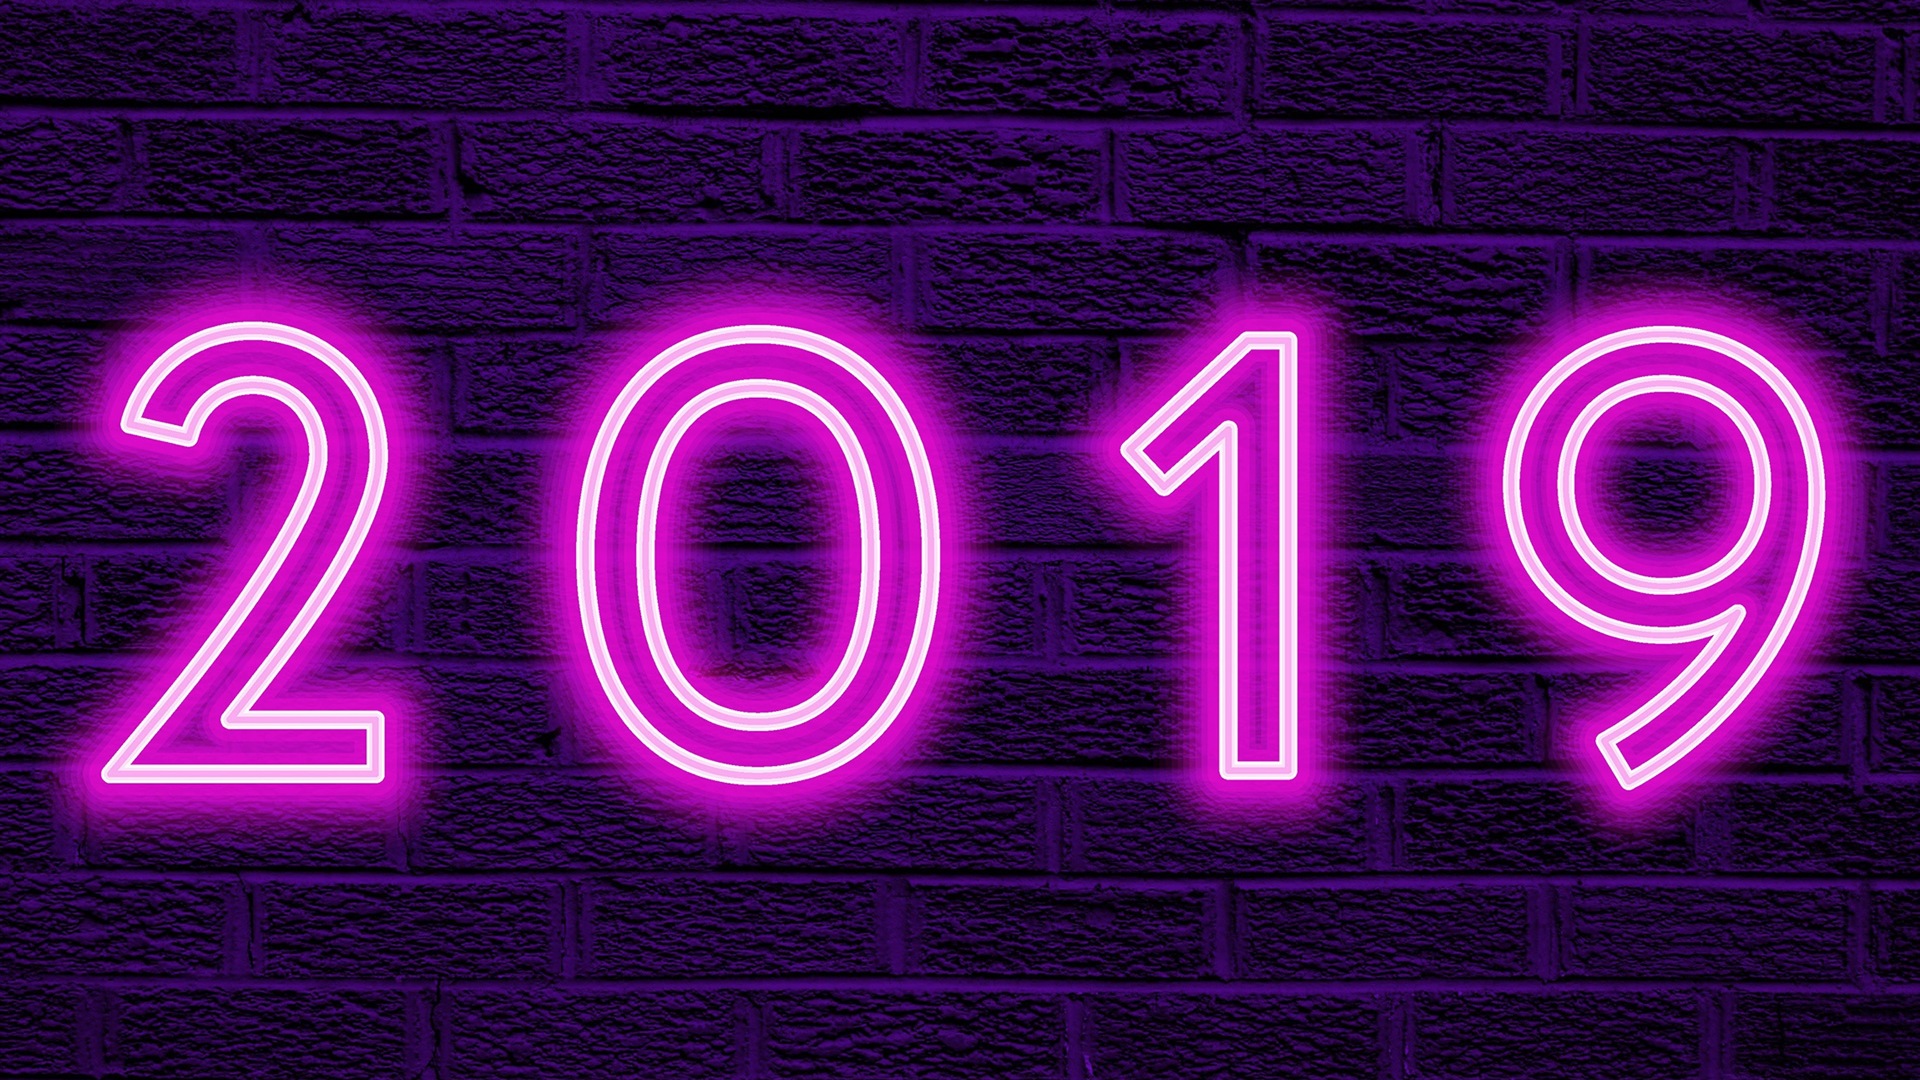 Happy New Year 2019 HD wallpapers #16 - 1920x1080